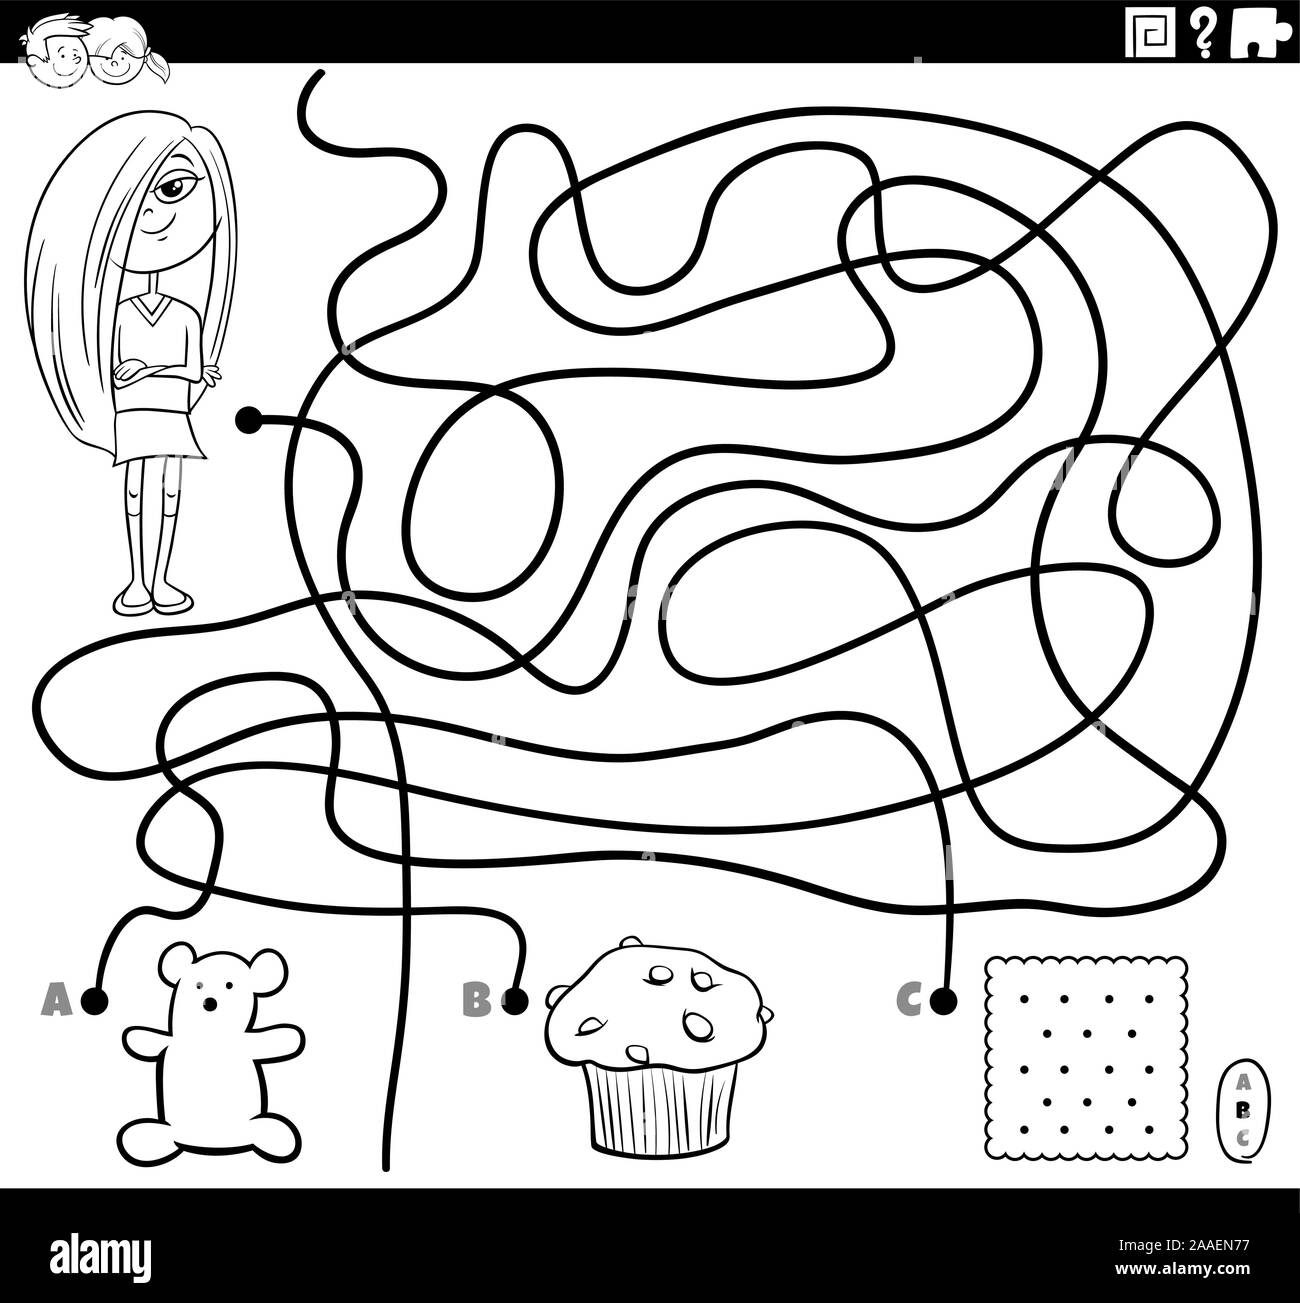 Black and White Cartoon Illustration of Lines Maze Puzzle Activity Game with Girl Character and Sweet Food Objects Coloring Book Page Stock Vector